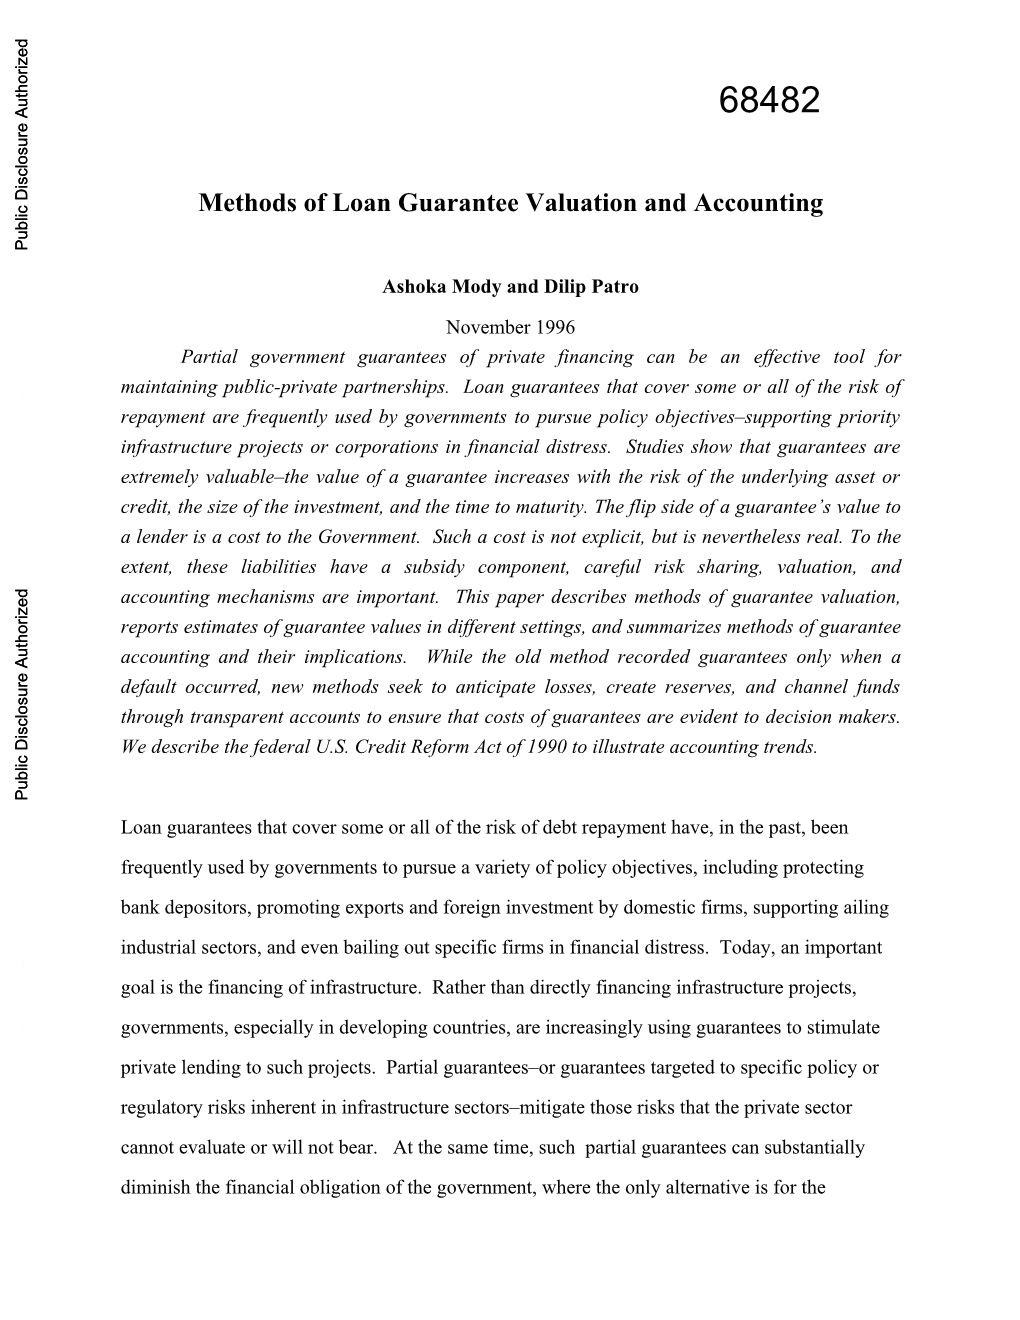 Methods of Loan Guarantee Valuation and Accounting Public Disclosure Authorized